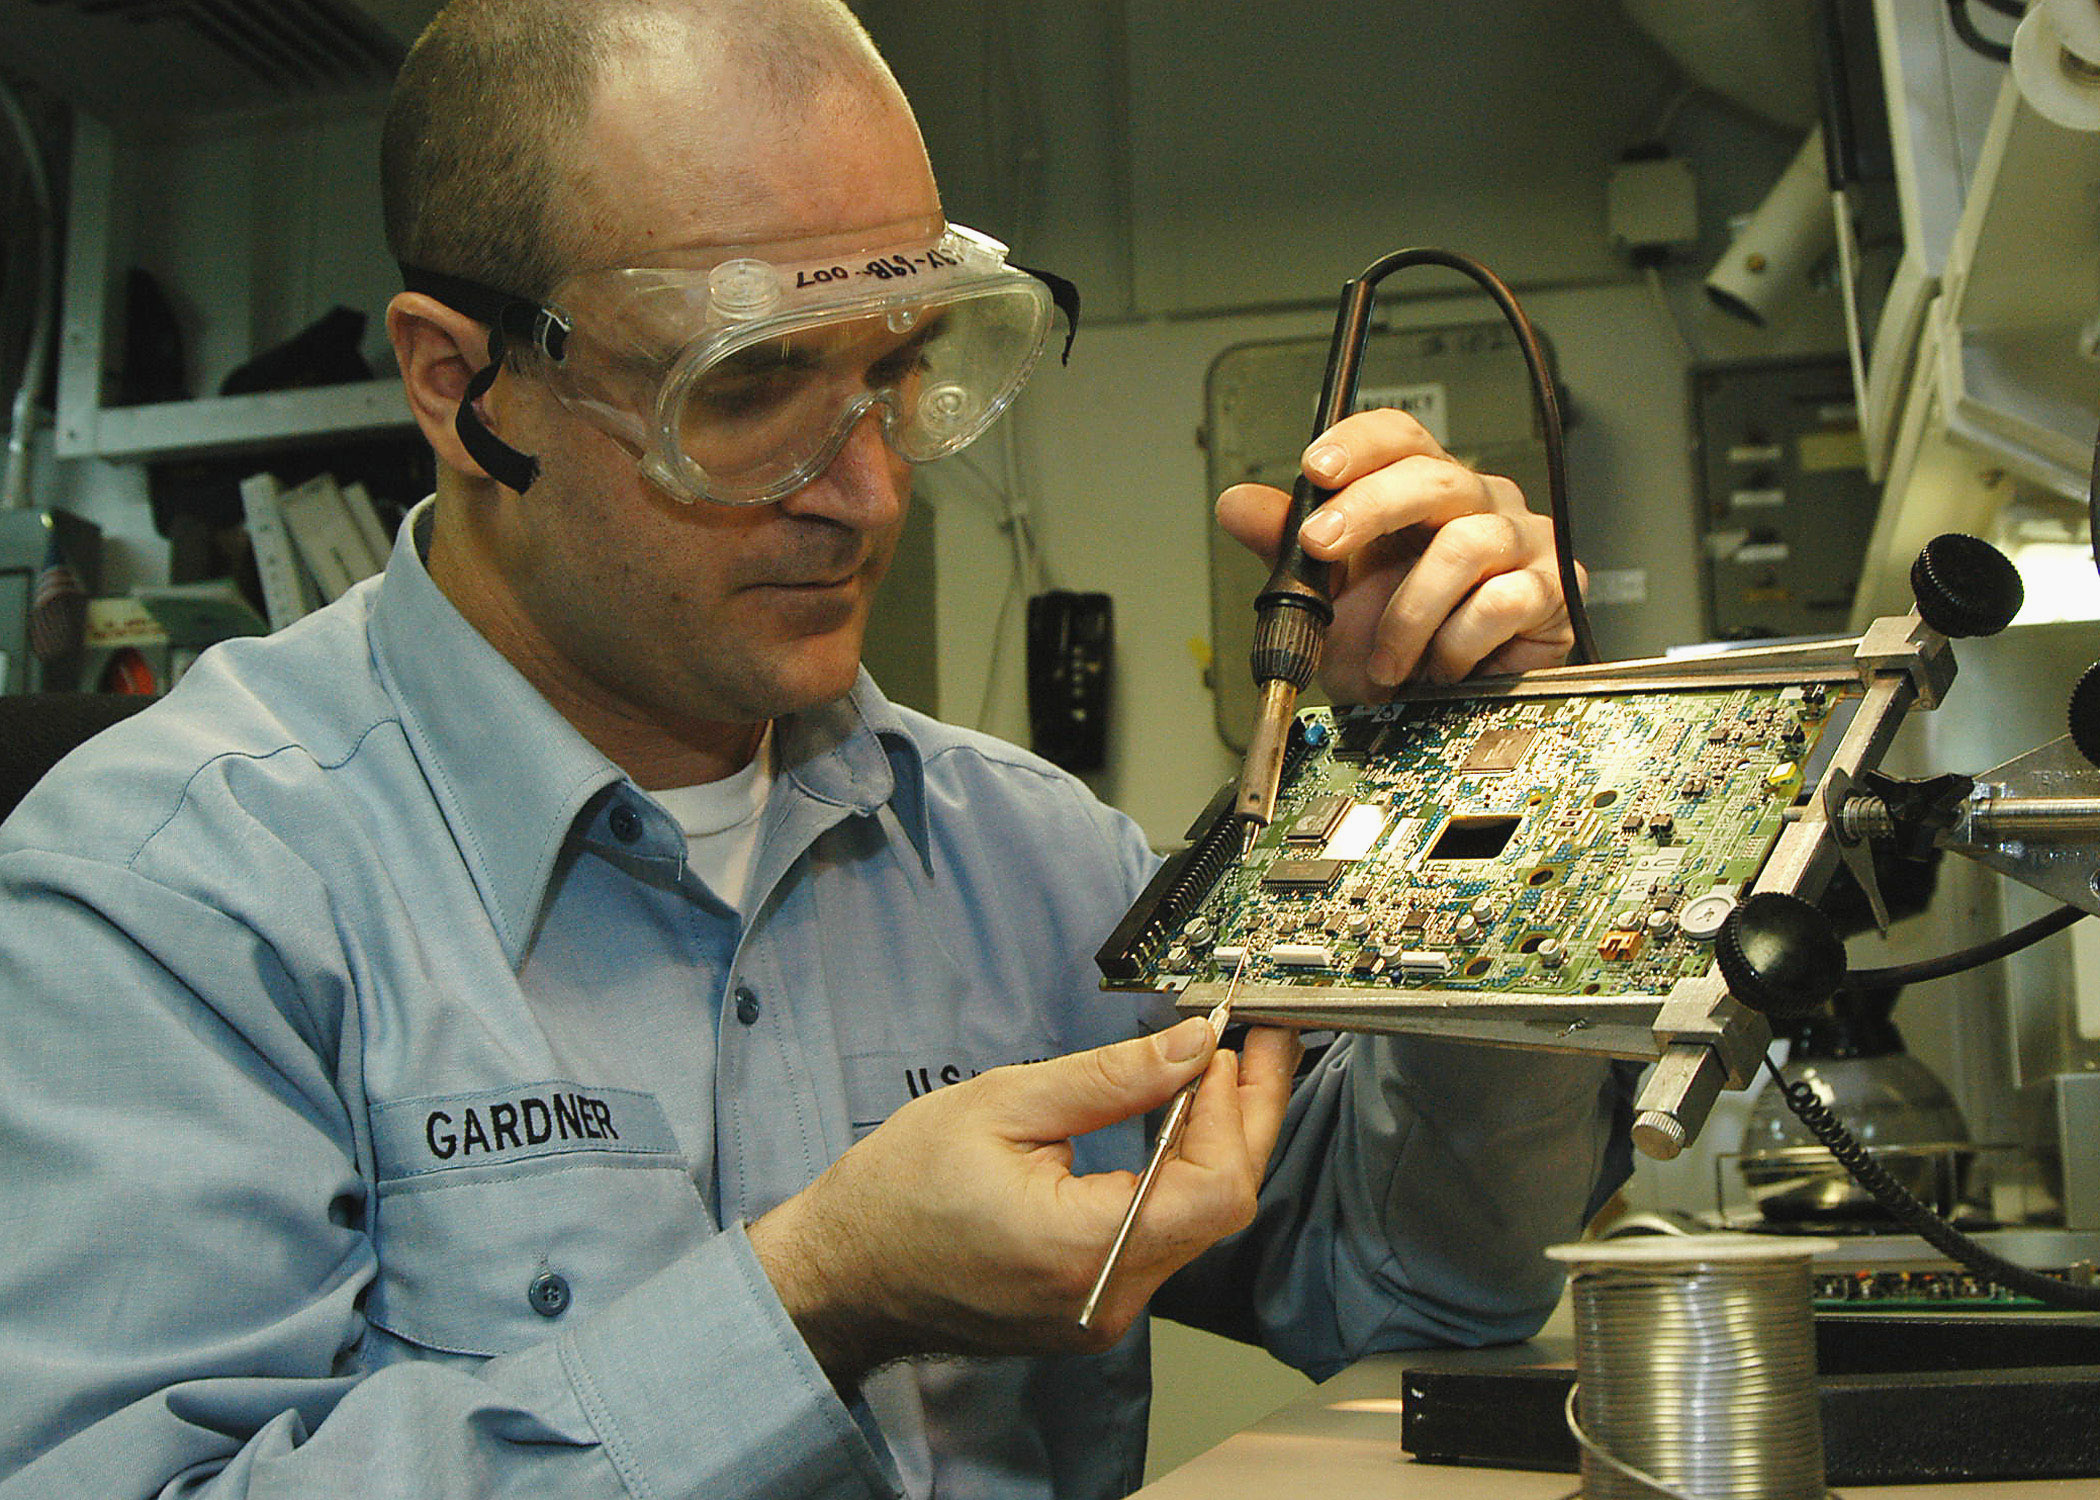 US Navy 040218-N-6278K-001 Aviation Electronics Technician 2nd Class Bill Gardner solders components on a printed circuit board